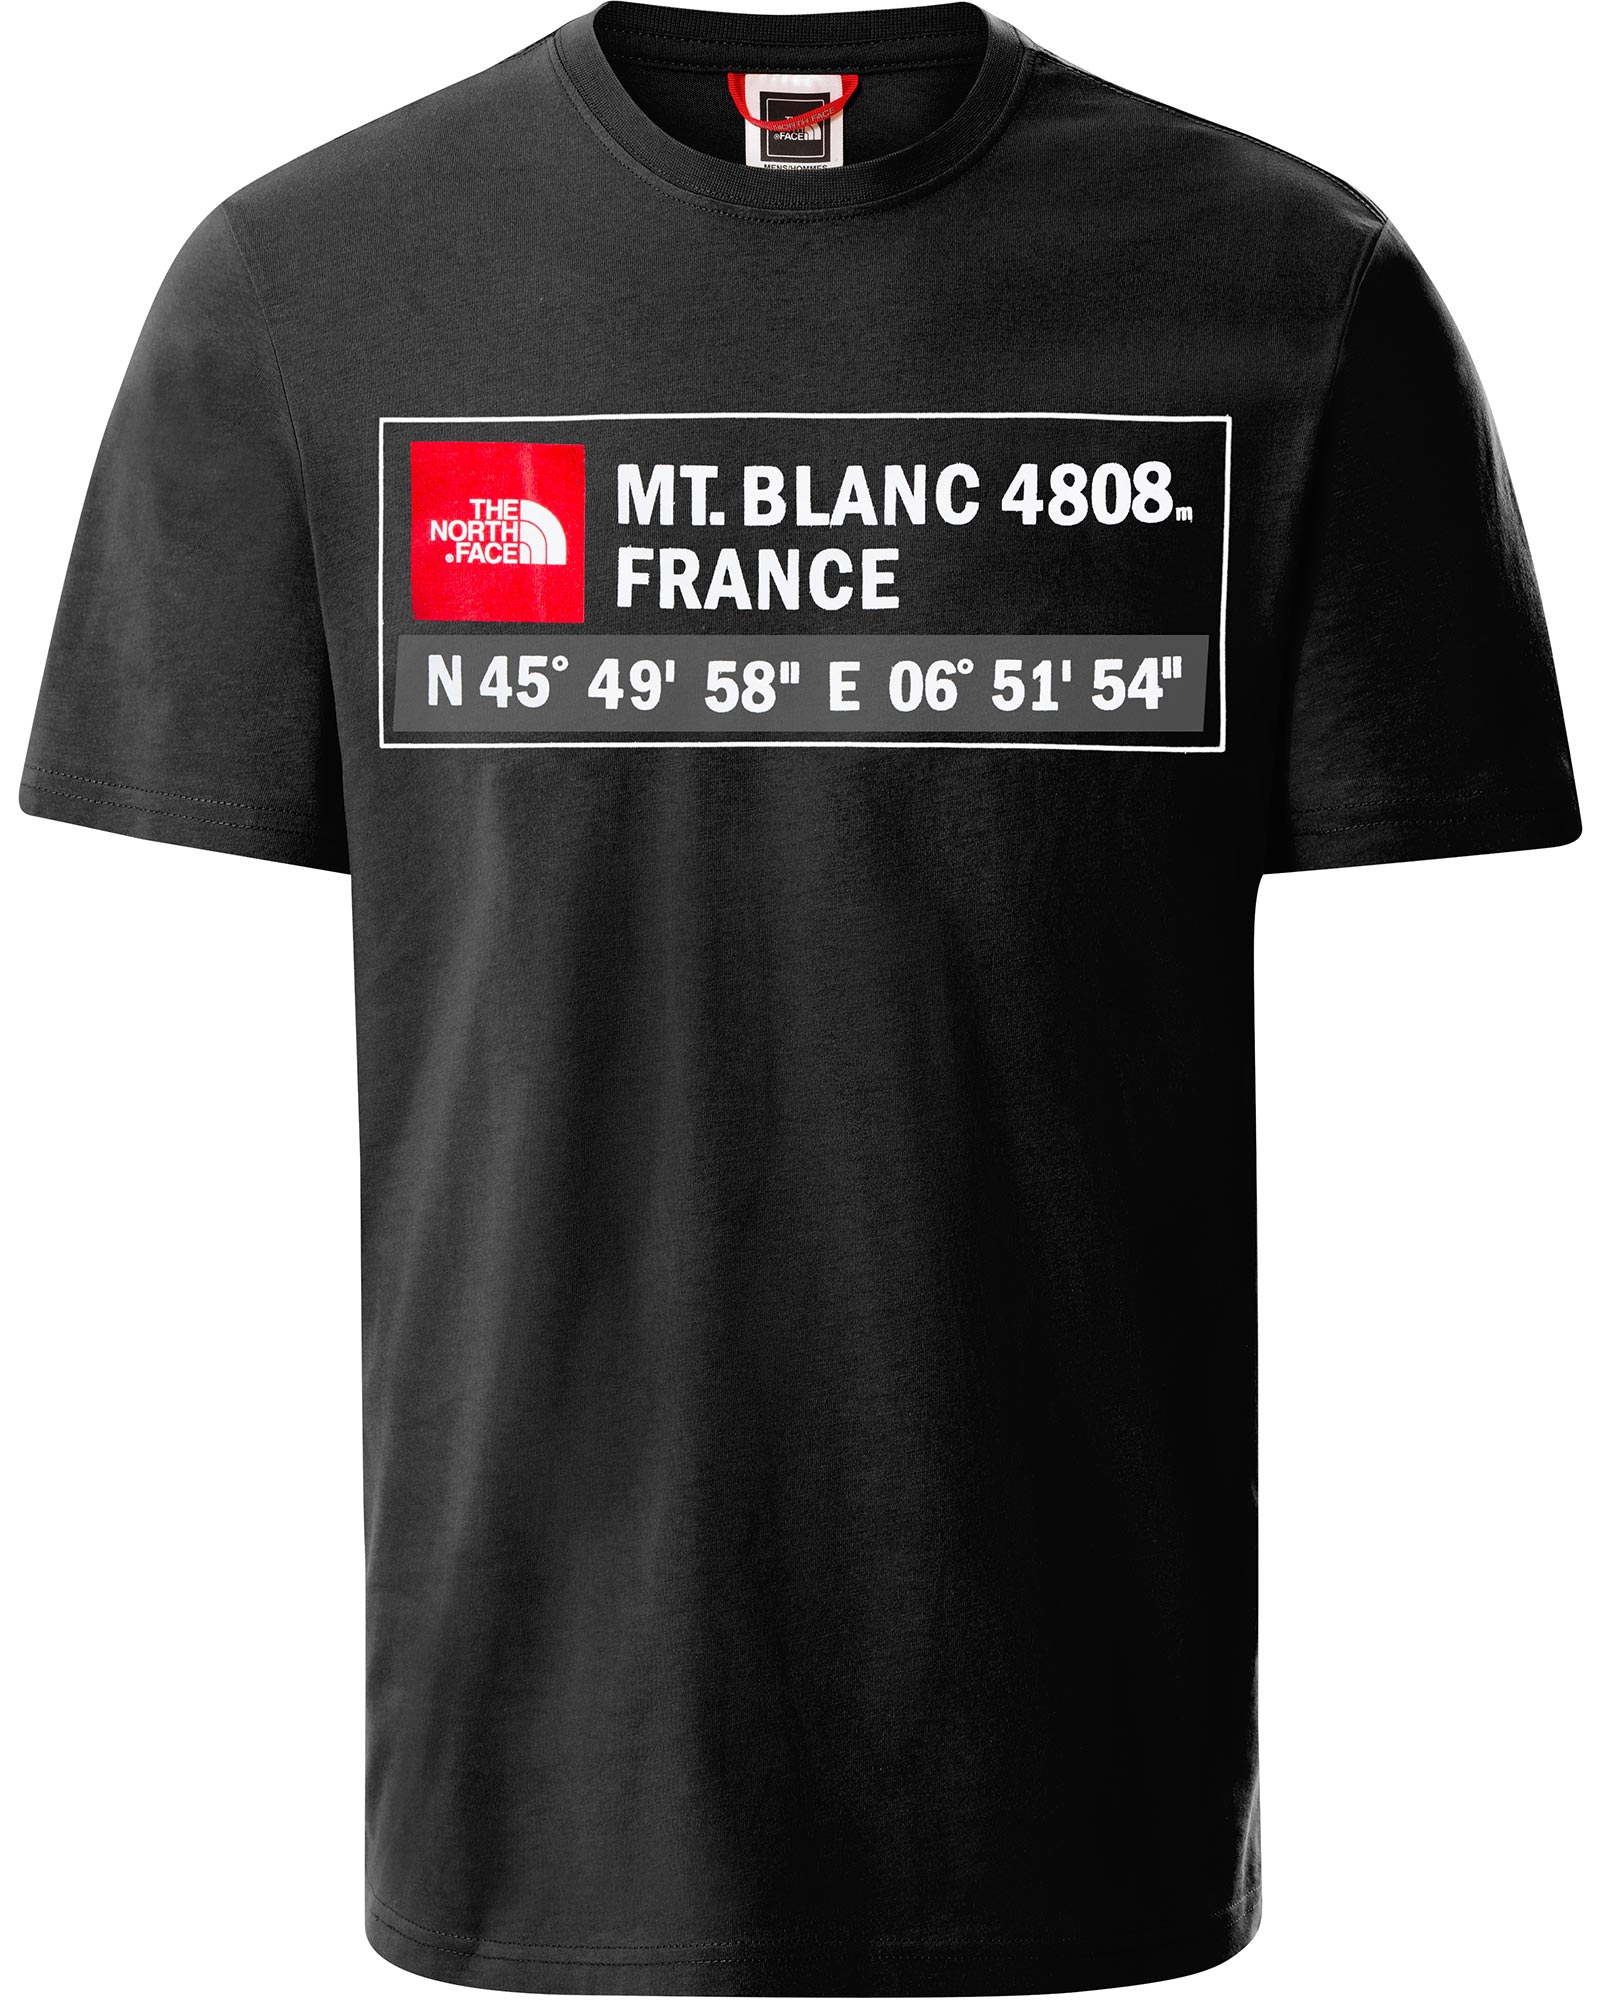 Product image of The North Face Mt Blanc GPS Men's T-Shirt